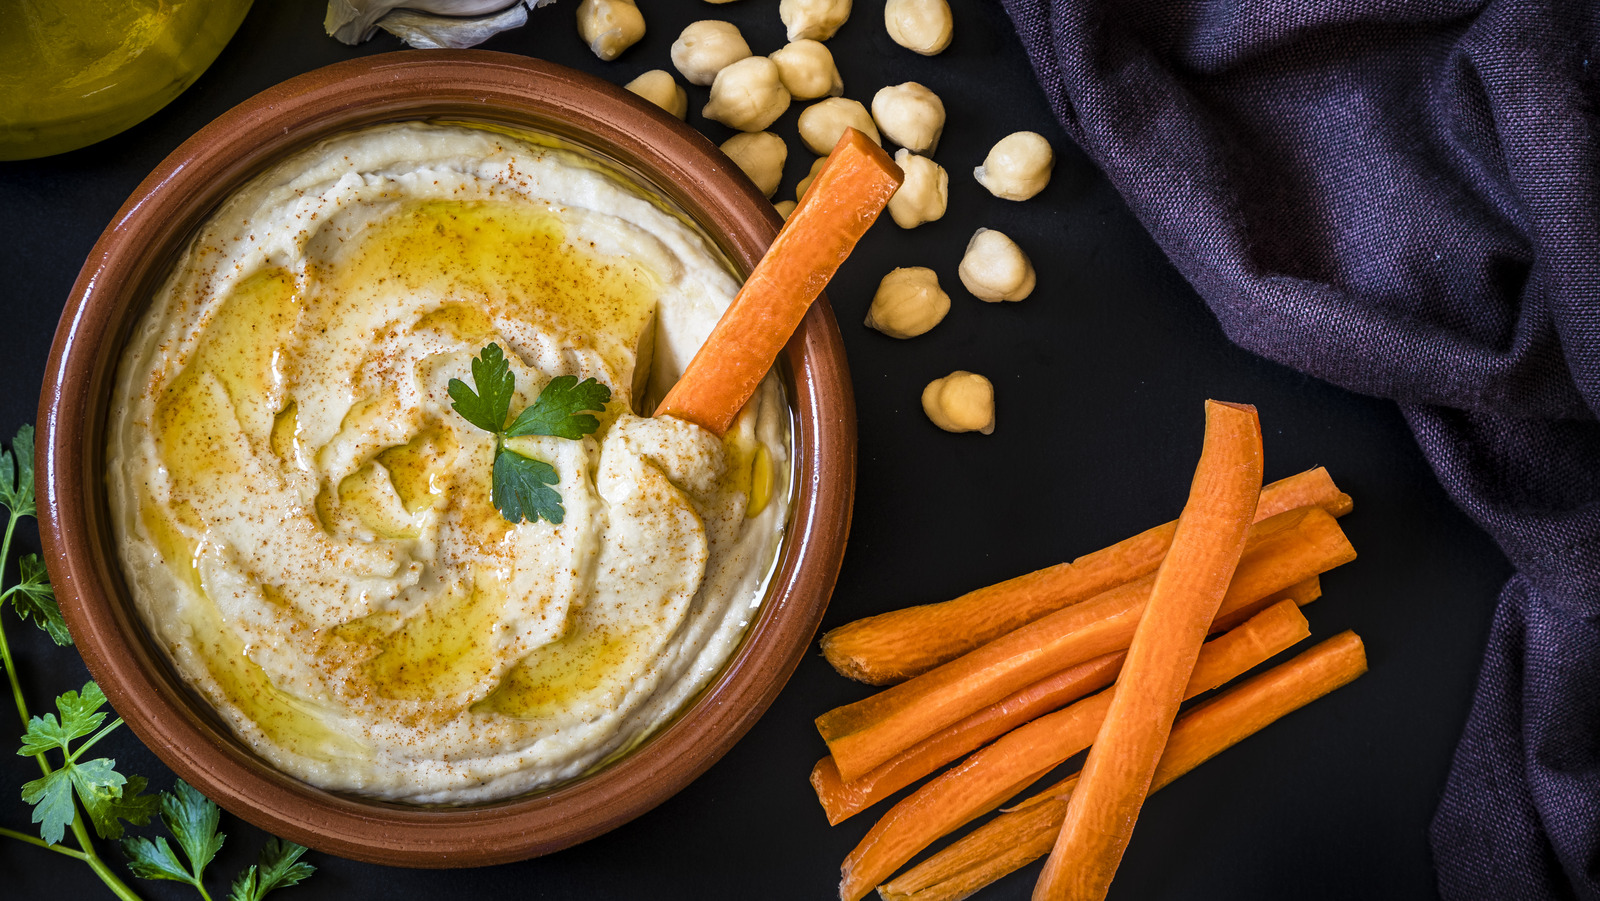 How long an open container of hummus will stay fresh